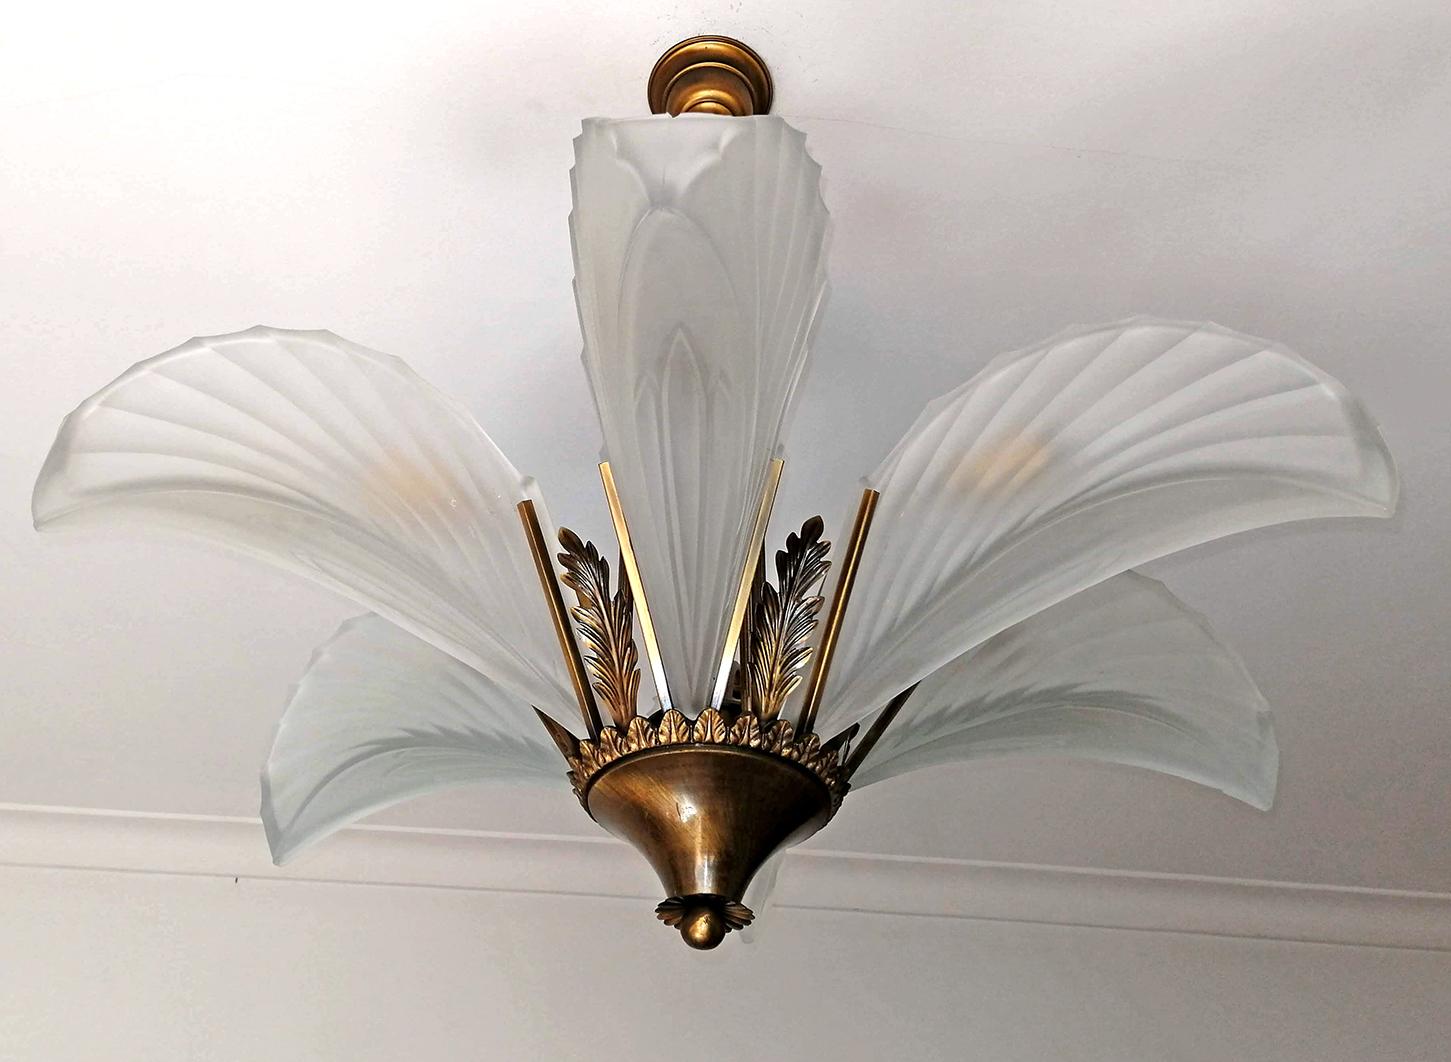 French Art Deco frosted glass leaves lamp shades burnished brass chandelier.
Measures:
Diameter 28.5 in/ 72 cm
Height 25.2 in/ 64 cm
Weight: 8Kg / 18 lb
6 light bulbs E14 good working condition/European wiring.
Your item will be carefully